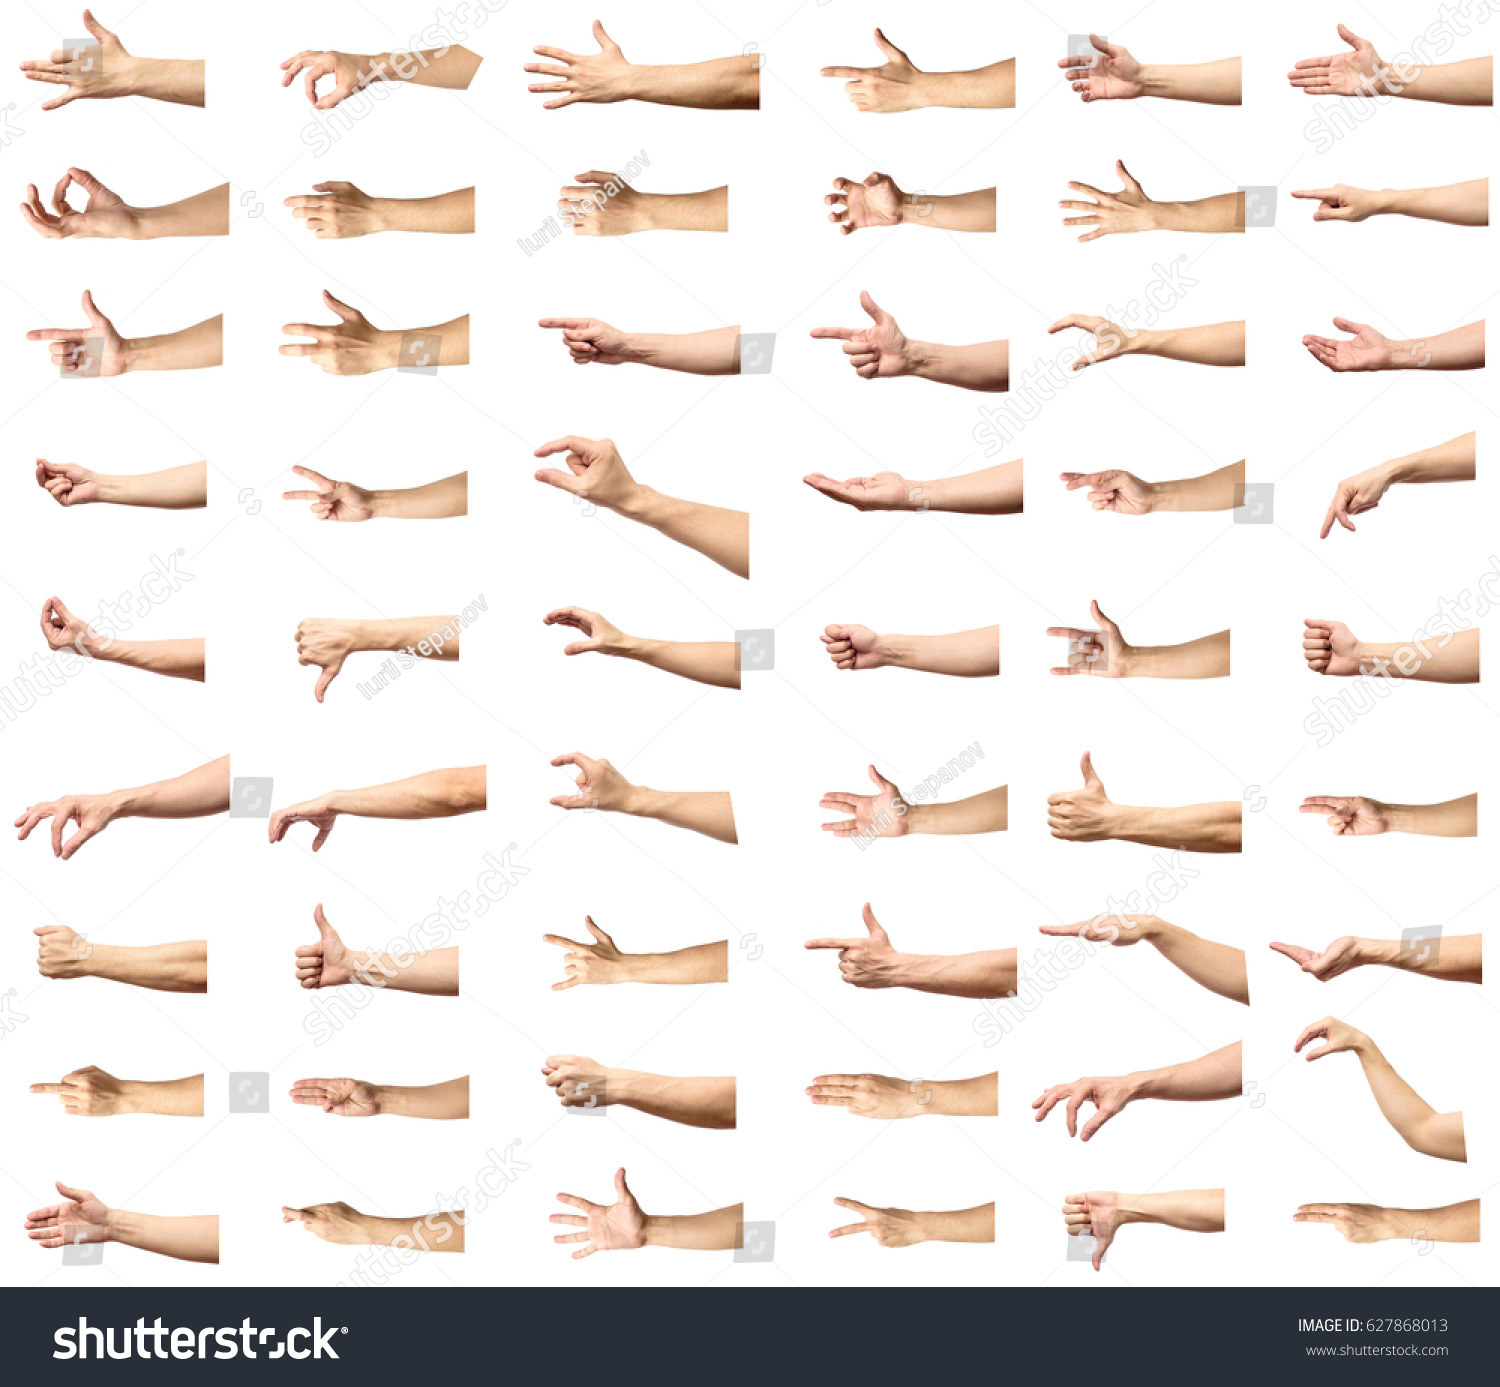 Multiple male caucasian hand gestures isolated over the white background, set of multiple images #627868013